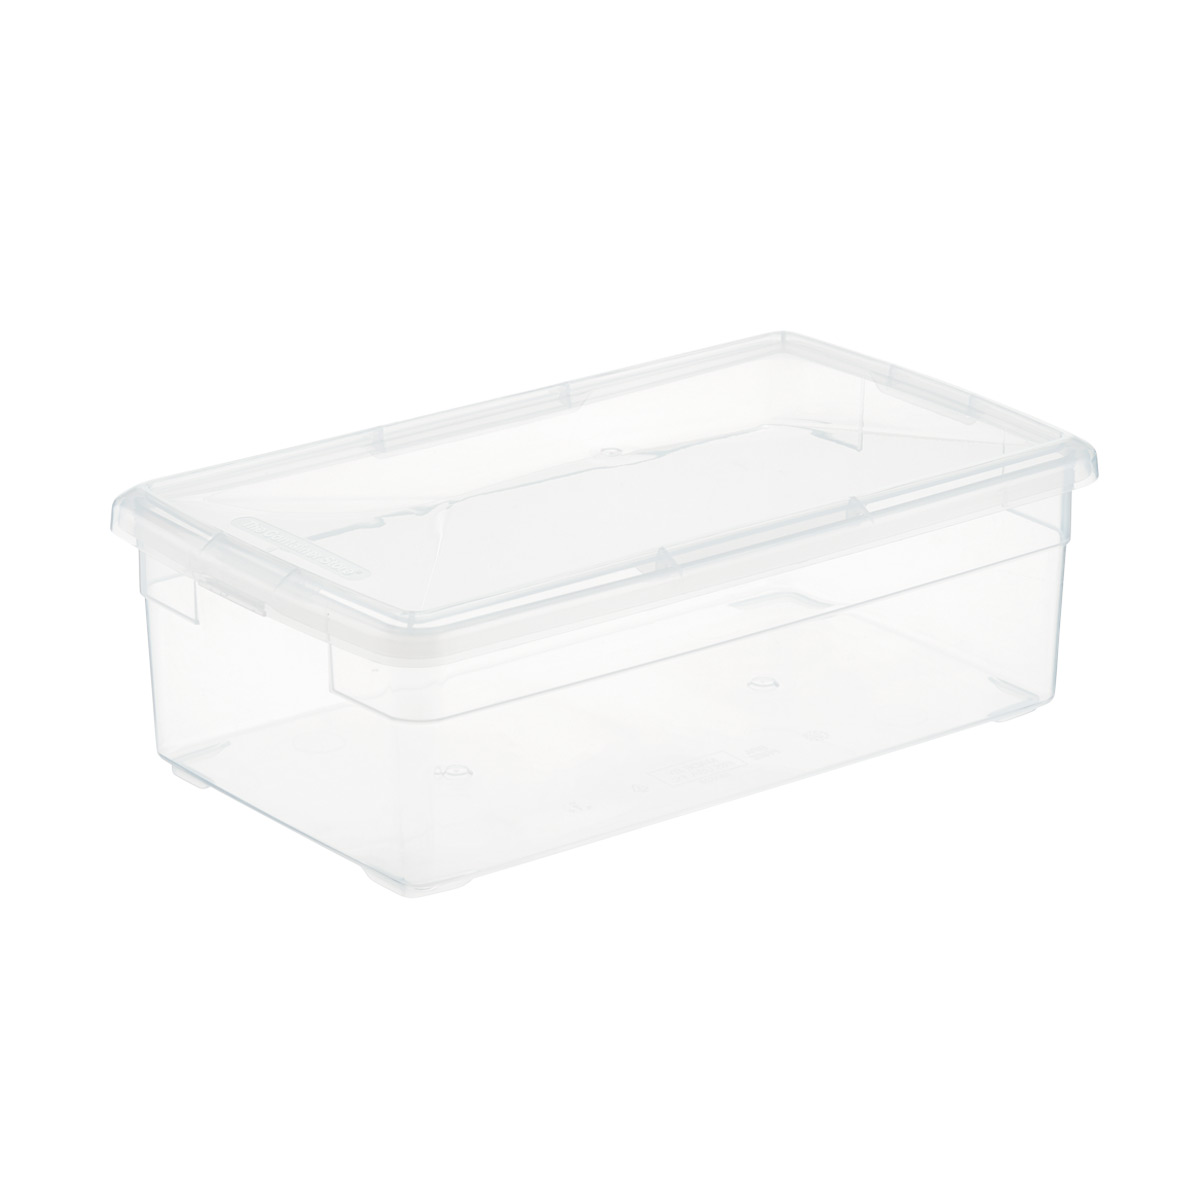 https://www.containerstore.com/catalogimages/356418/10008759-our-shoe-box.jpg